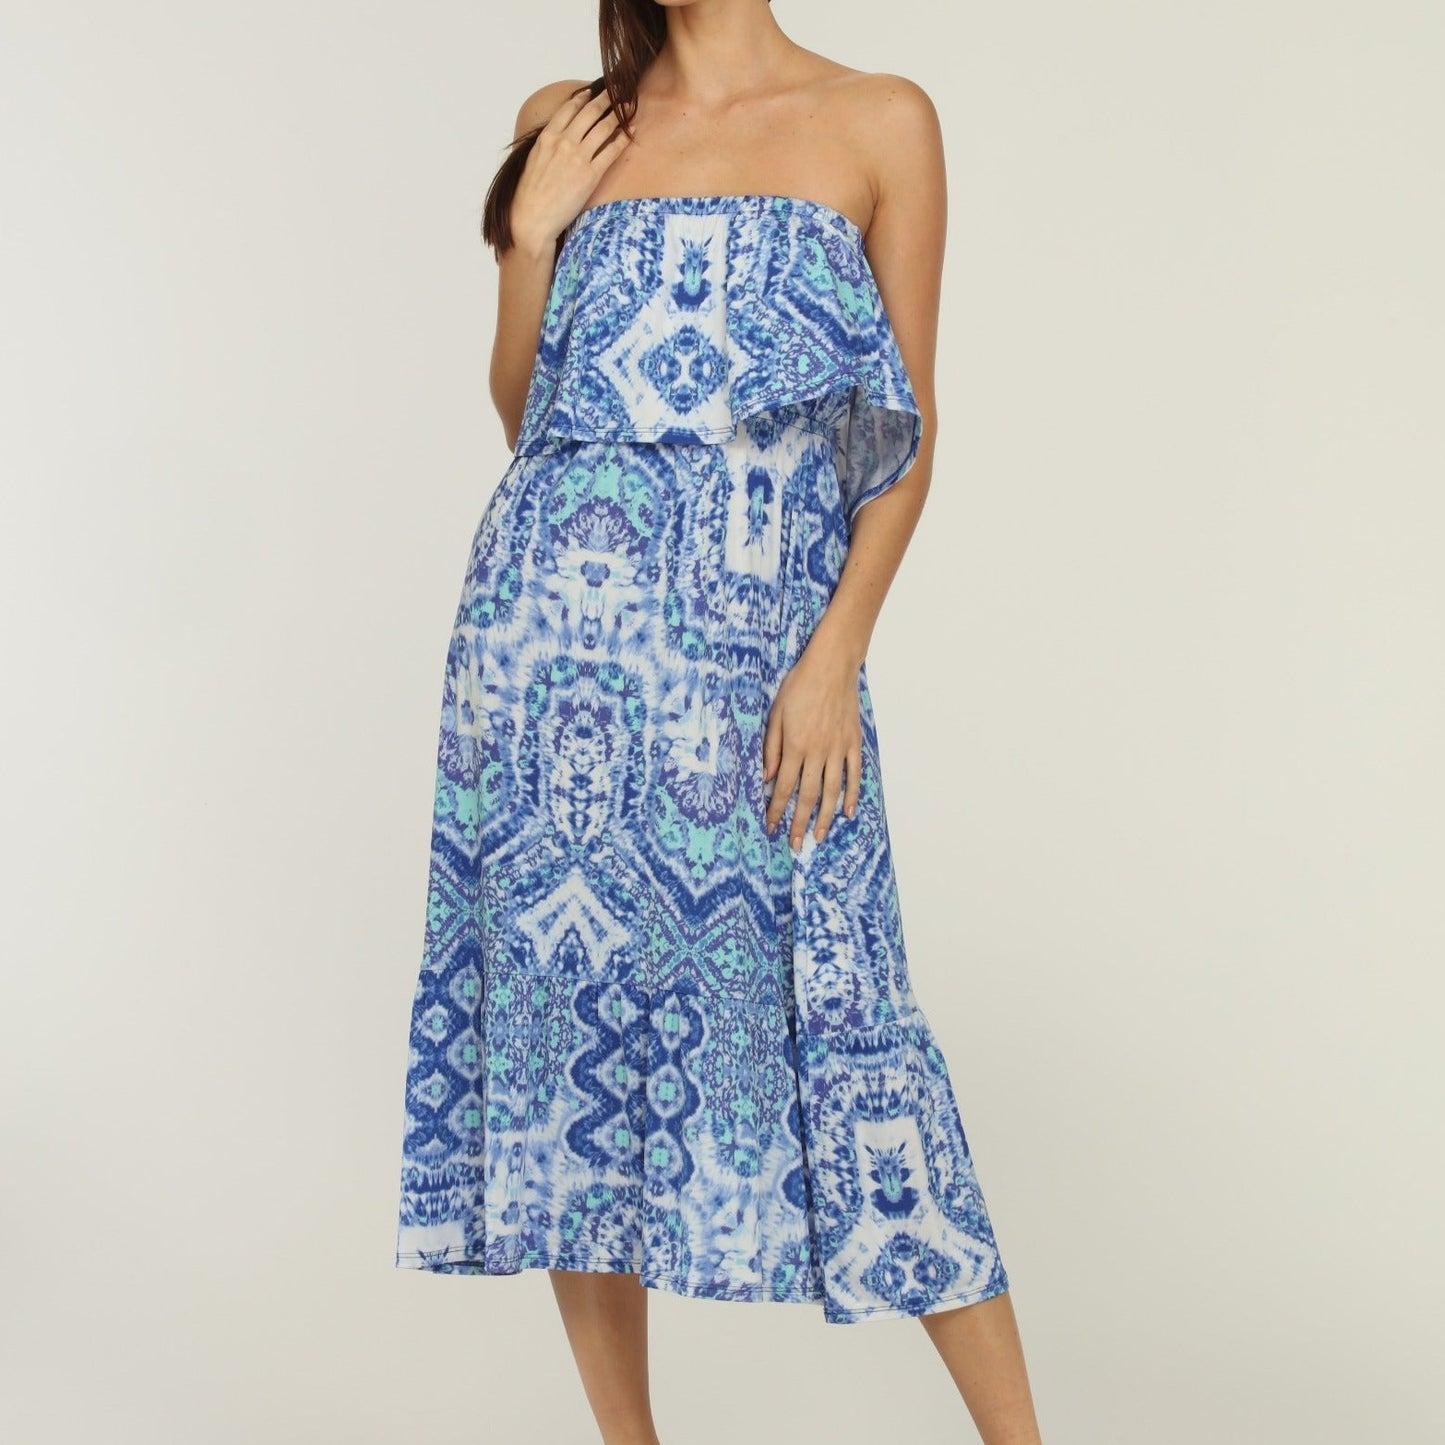 Ruffle Maxi Tube Dress - 1DL-1057 - Bosworth Unclassified VERONICA M BLUE S 